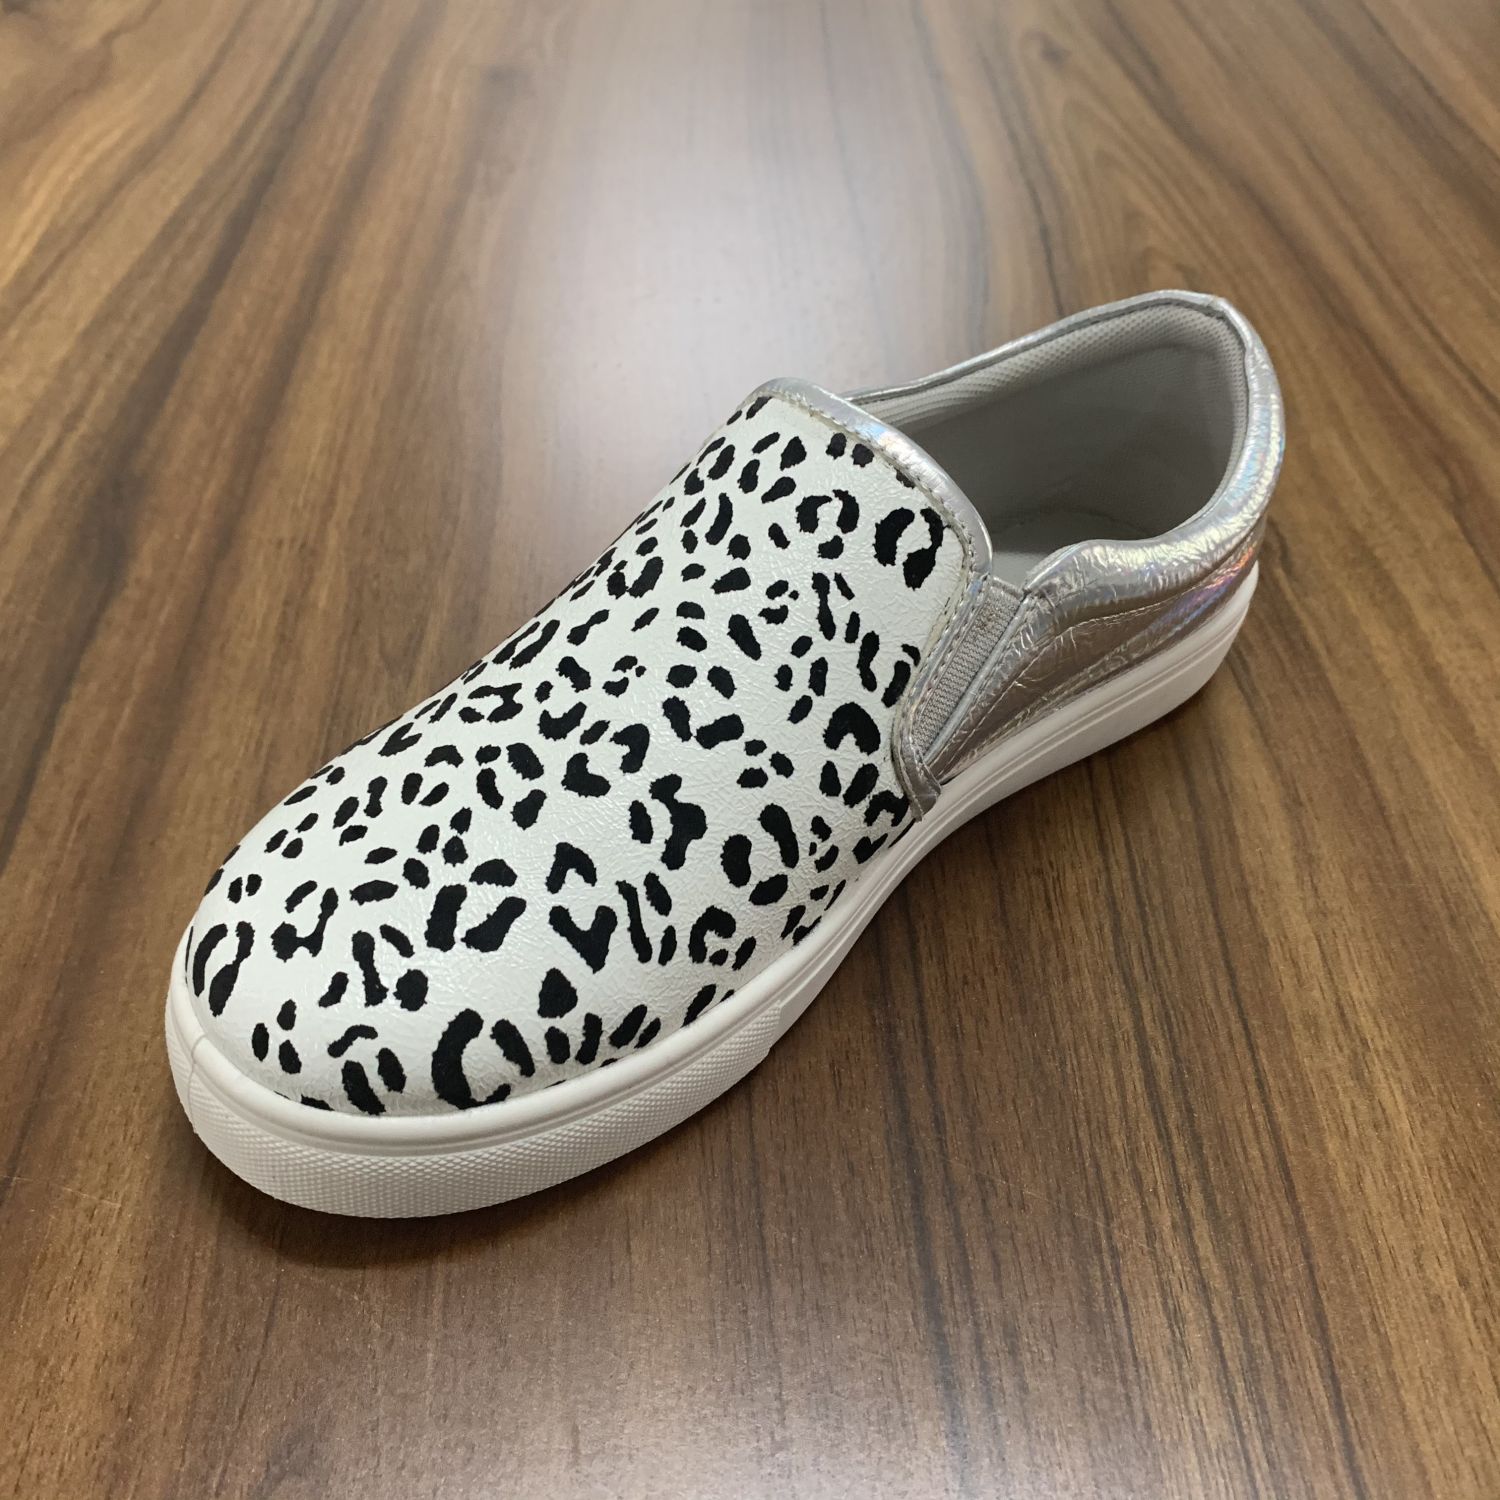 Women's Gilrs' Slip On Loafers